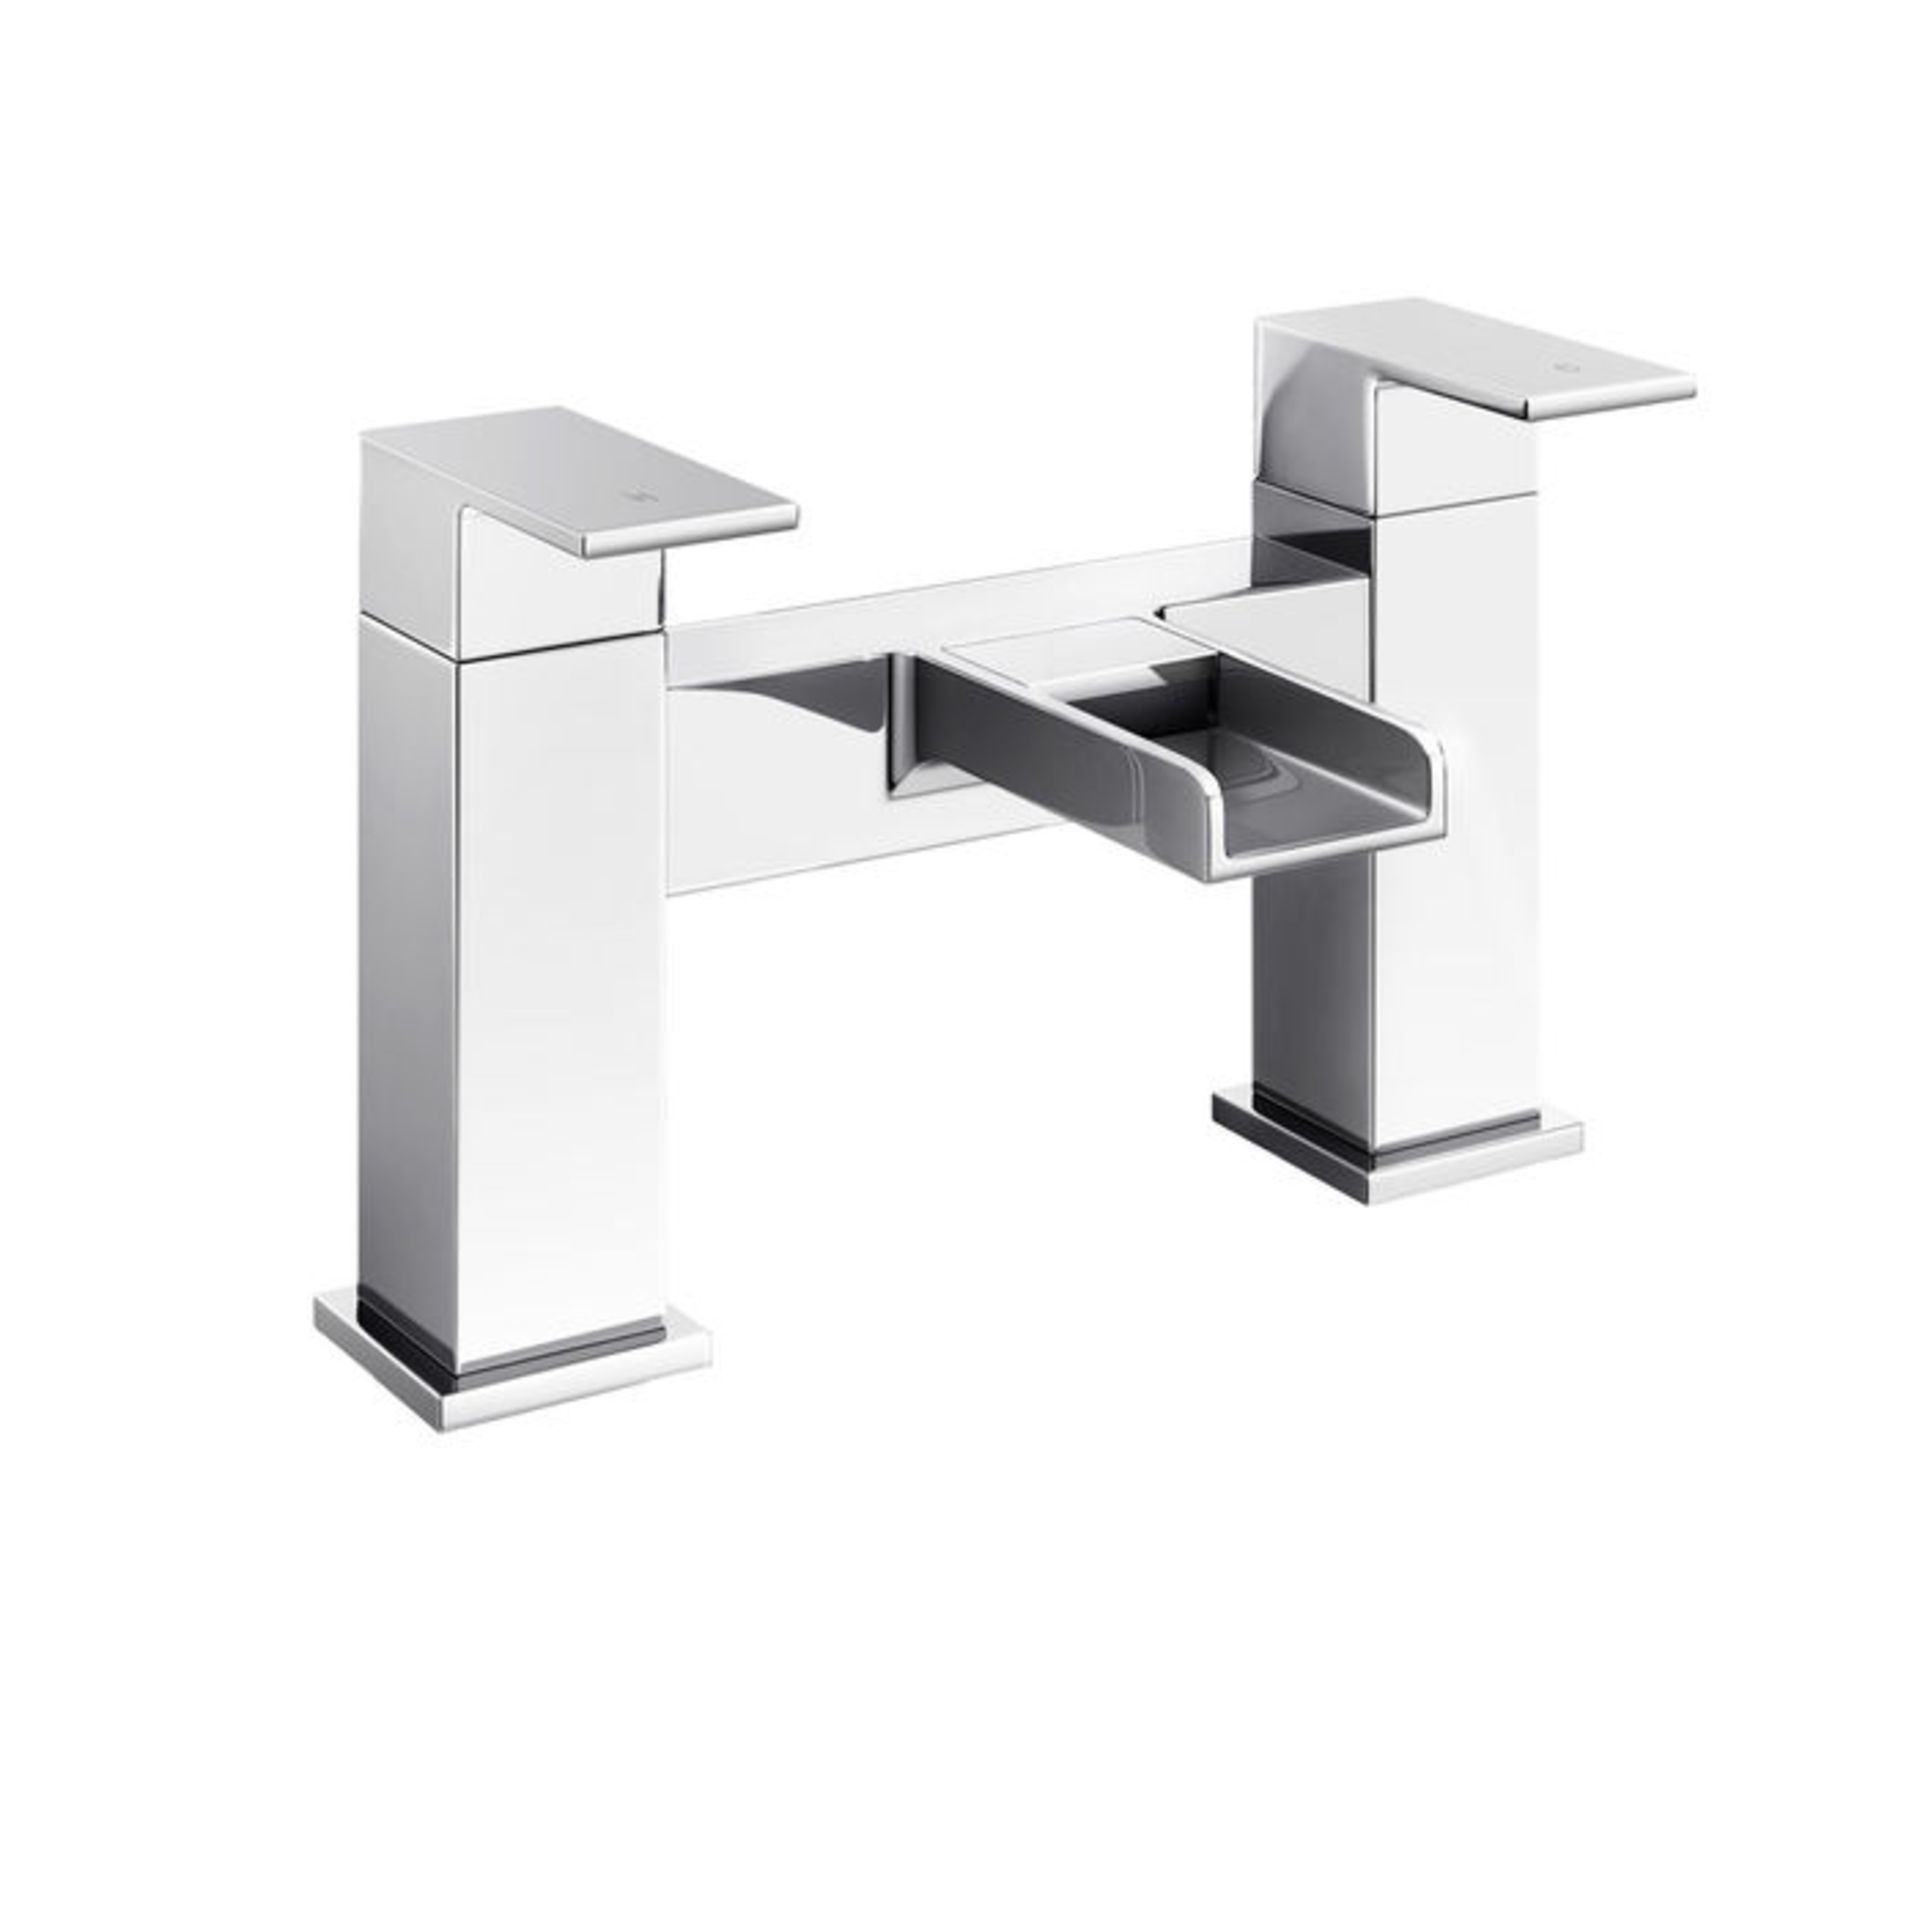 New & Boxed Niagra Waterfall Bath Mixer Taps. Tb3108.Chrome Plated Solid Brass 1/4 Turn Solid B... - Image 3 of 4